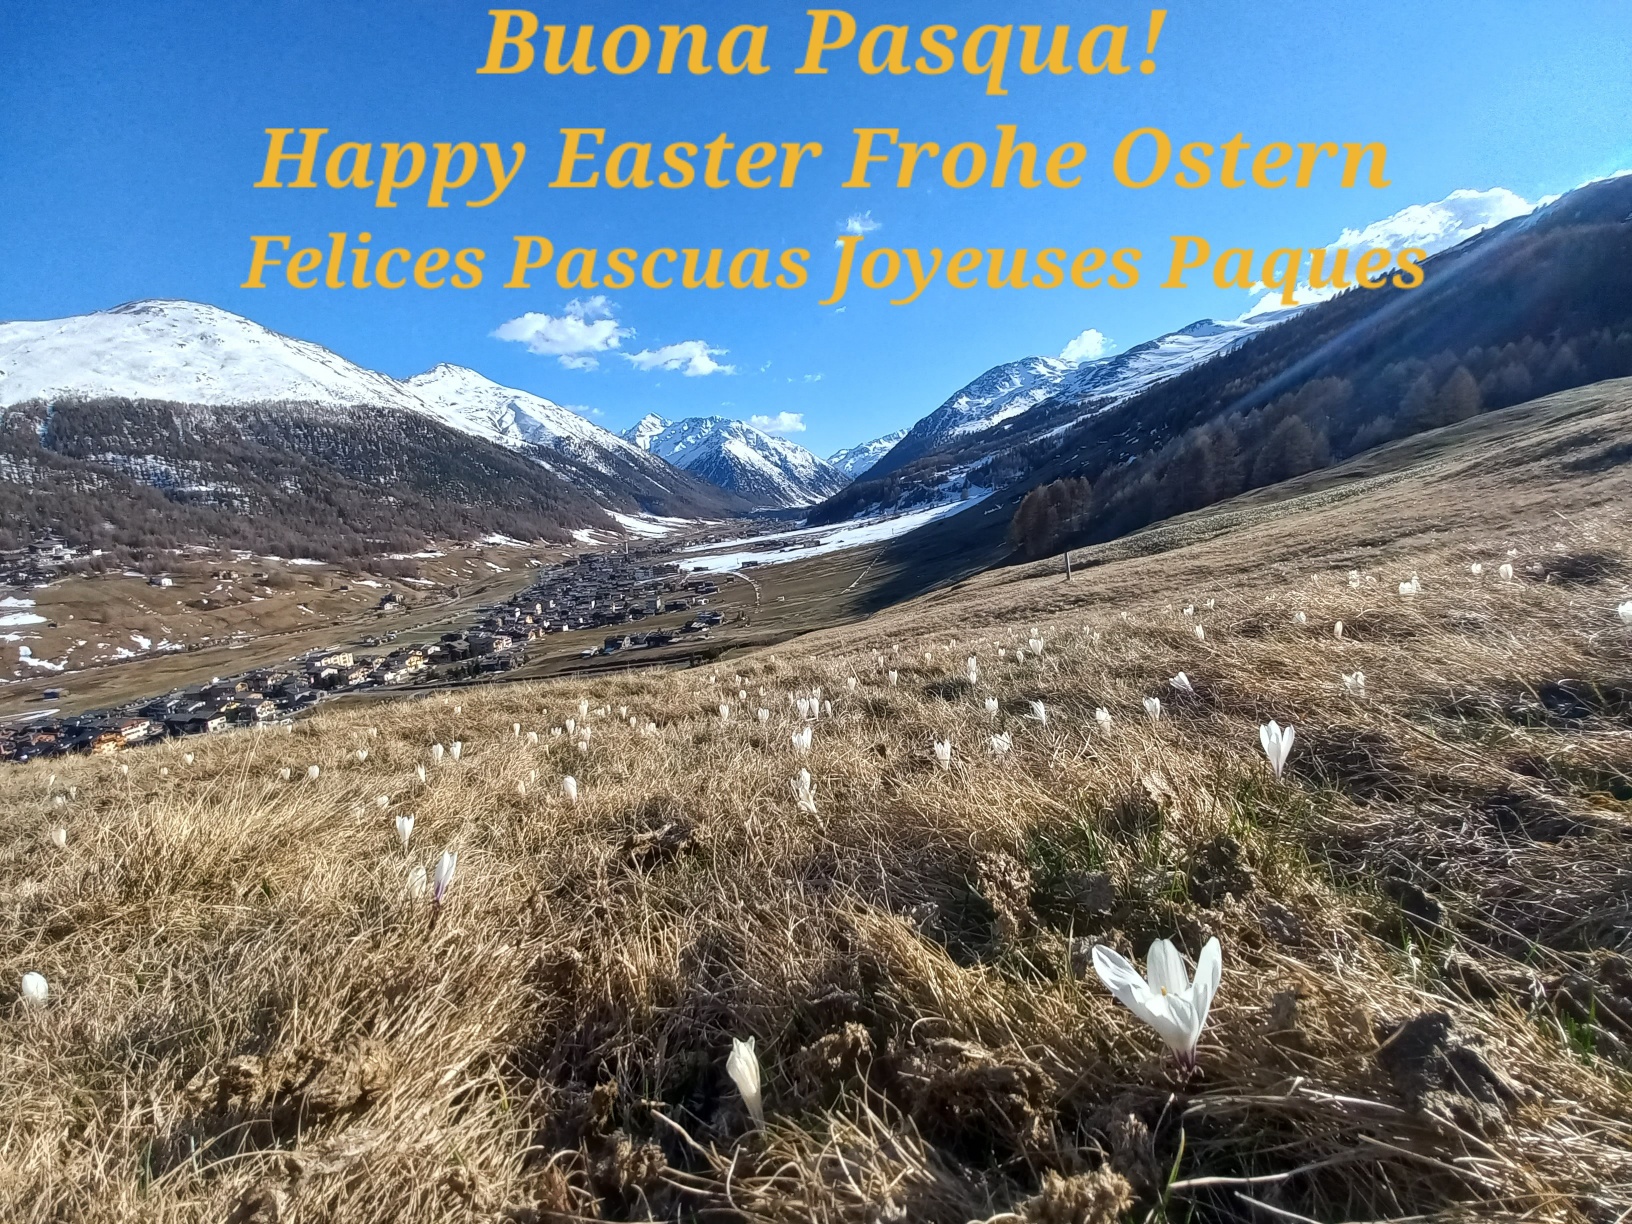 Featured image for “BUONA PASQUA! HAPPY EASTER!”